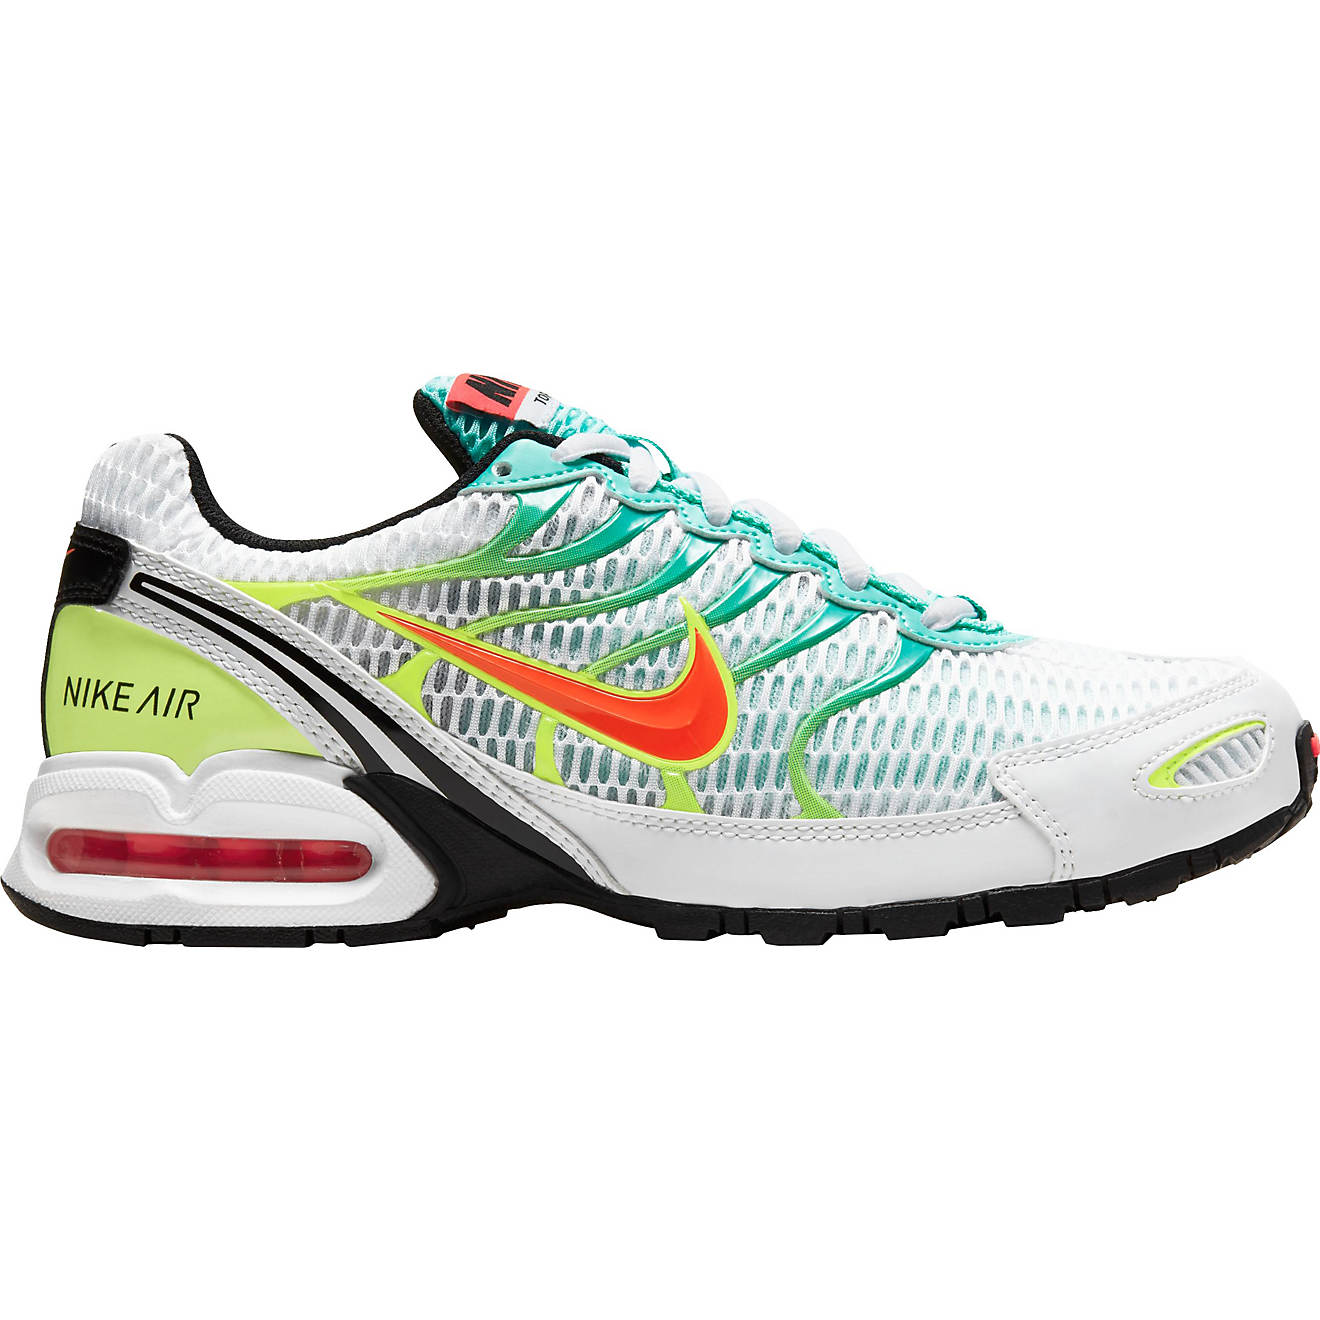 Nike Women's Air Max Torch 4 Running Shoes